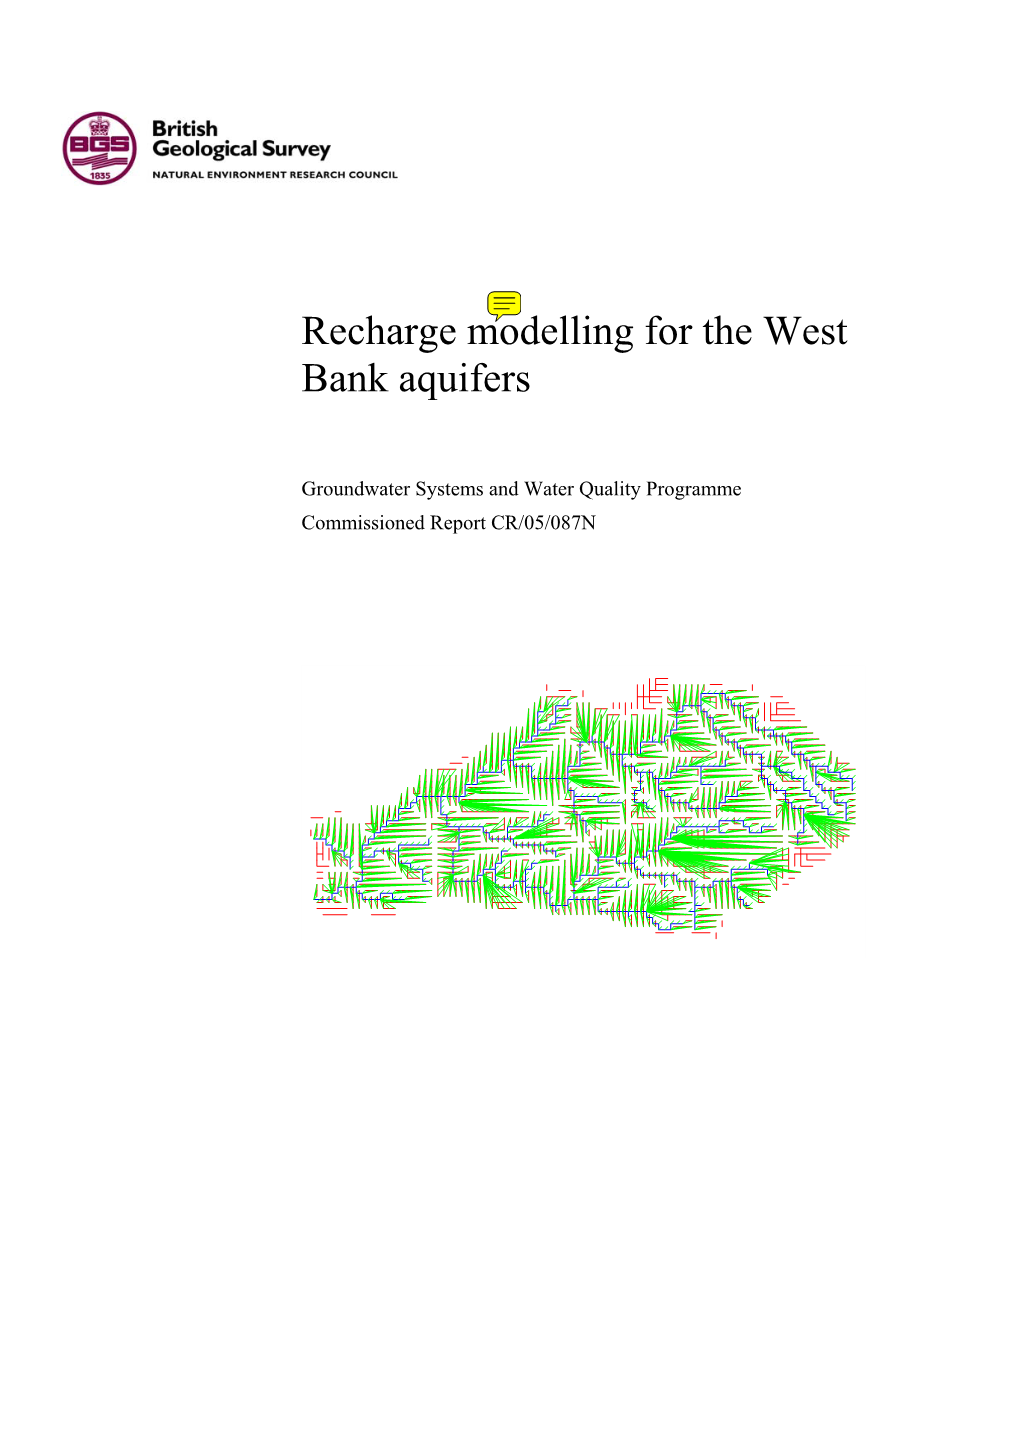 Recharge Modelling for the West Bank Aquifers